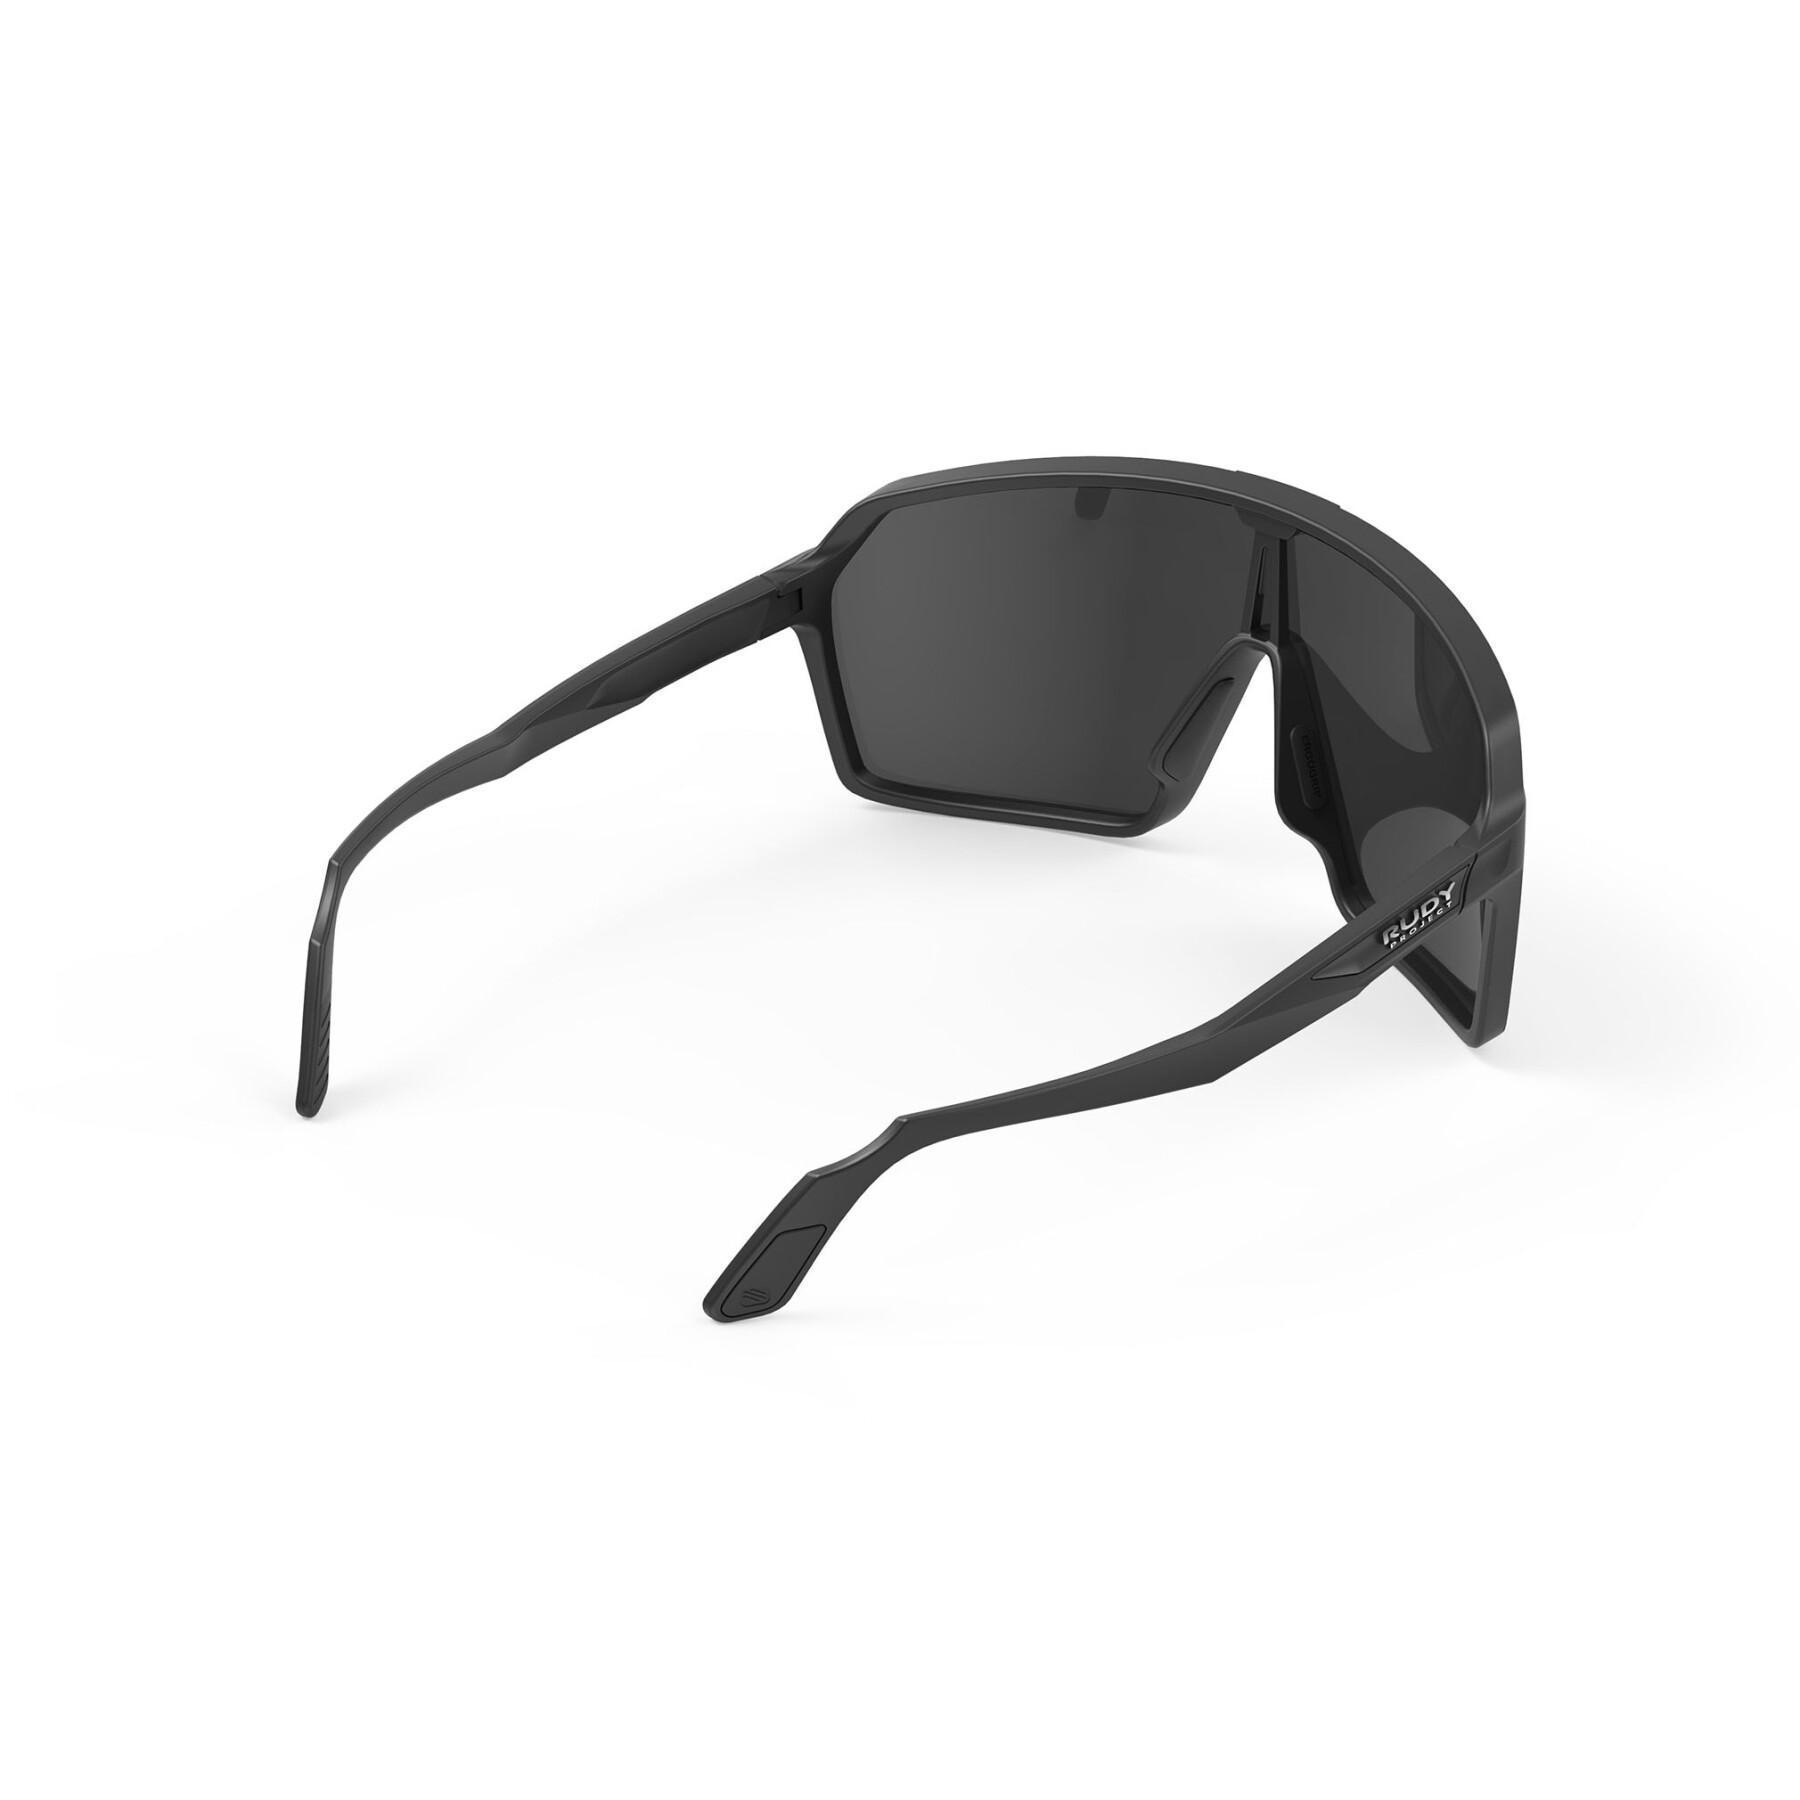 Sunglasses Rudy Project spinshield